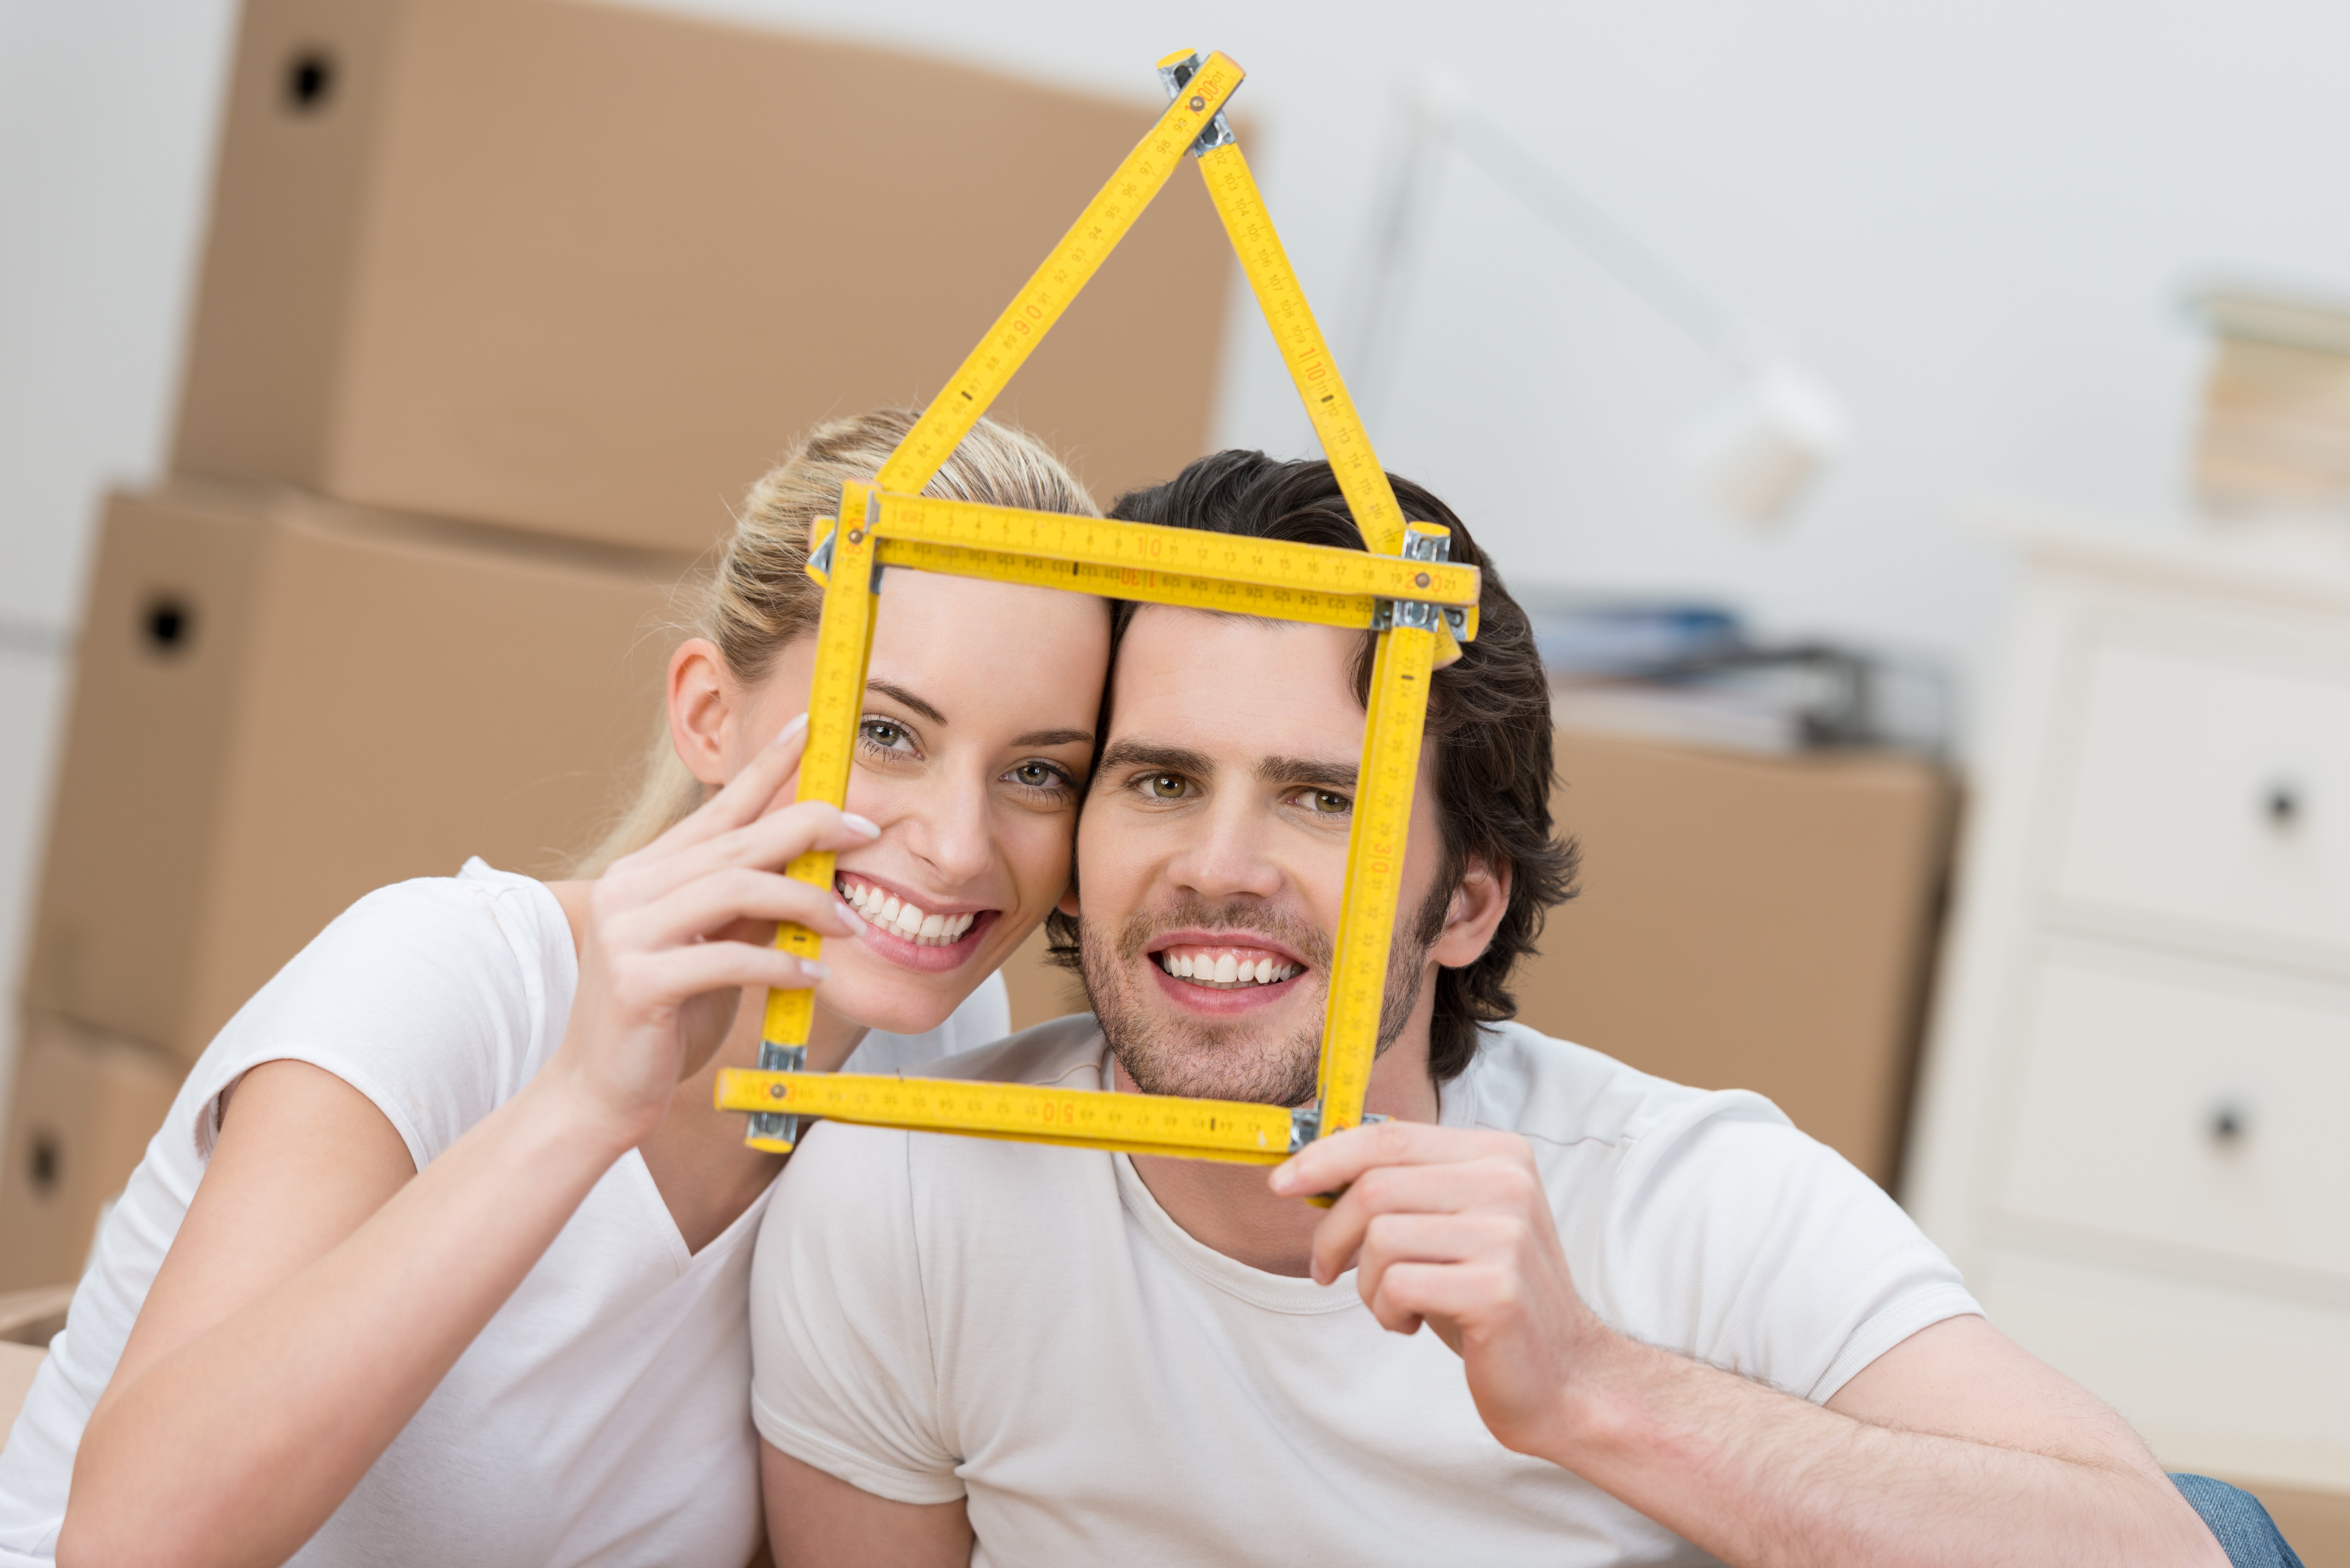 Young couple dreaming of their new home grinning as they hold up a builders ruler shaped as the frame of a house